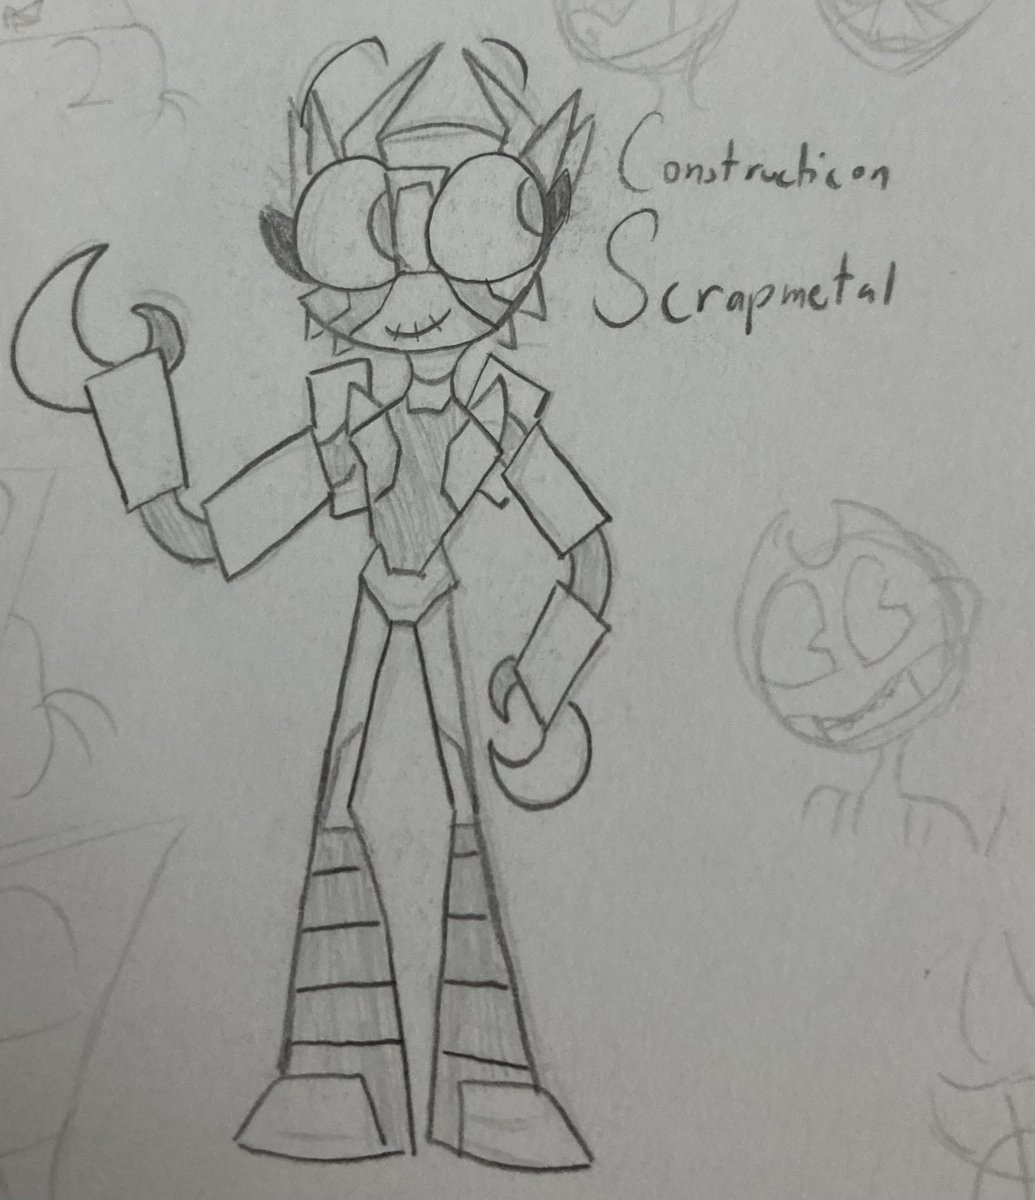 found this old ahh design i did for scrapmetal back when the SS came out

in my hc she was one of the shanghai bots and was besties with demolisher,but after seeing him get killed by prime she went to the other constructicons…only to get ripped apart to fix megatron
#Maccadam